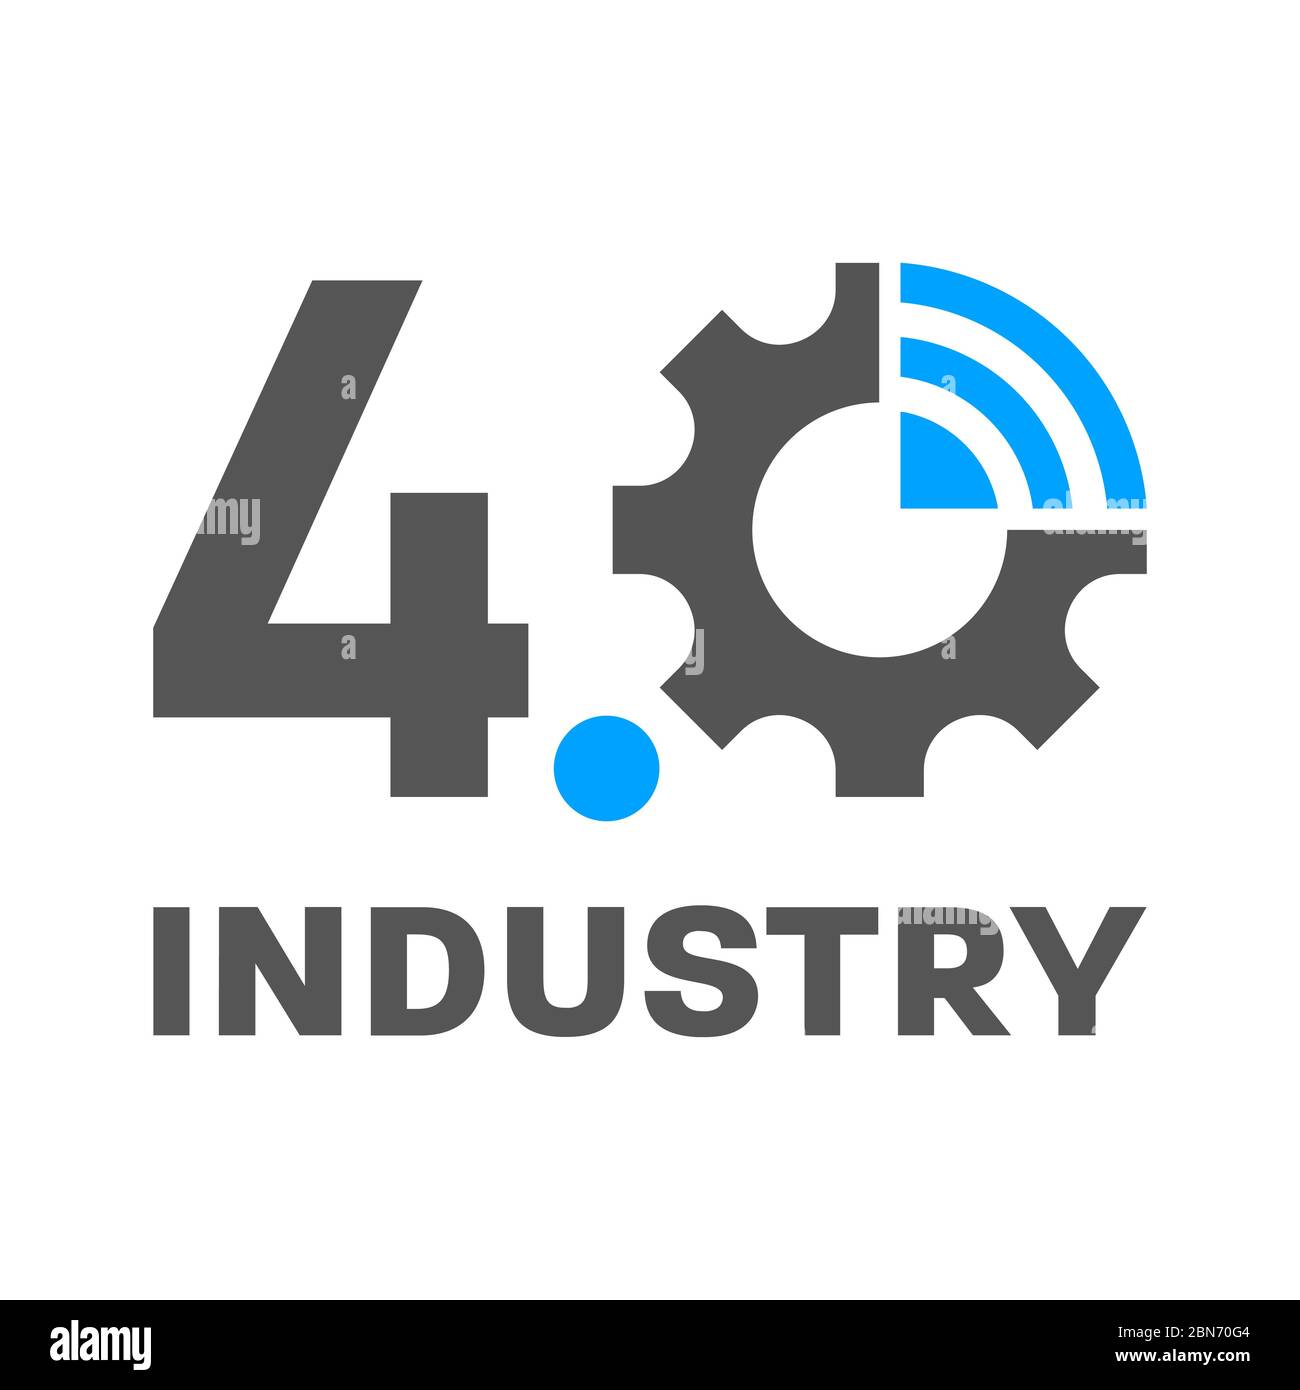 Industry 4.0, IoT, logo di concetto Smart Factory. Illustrazione vettoriale Illustrazione Vettoriale